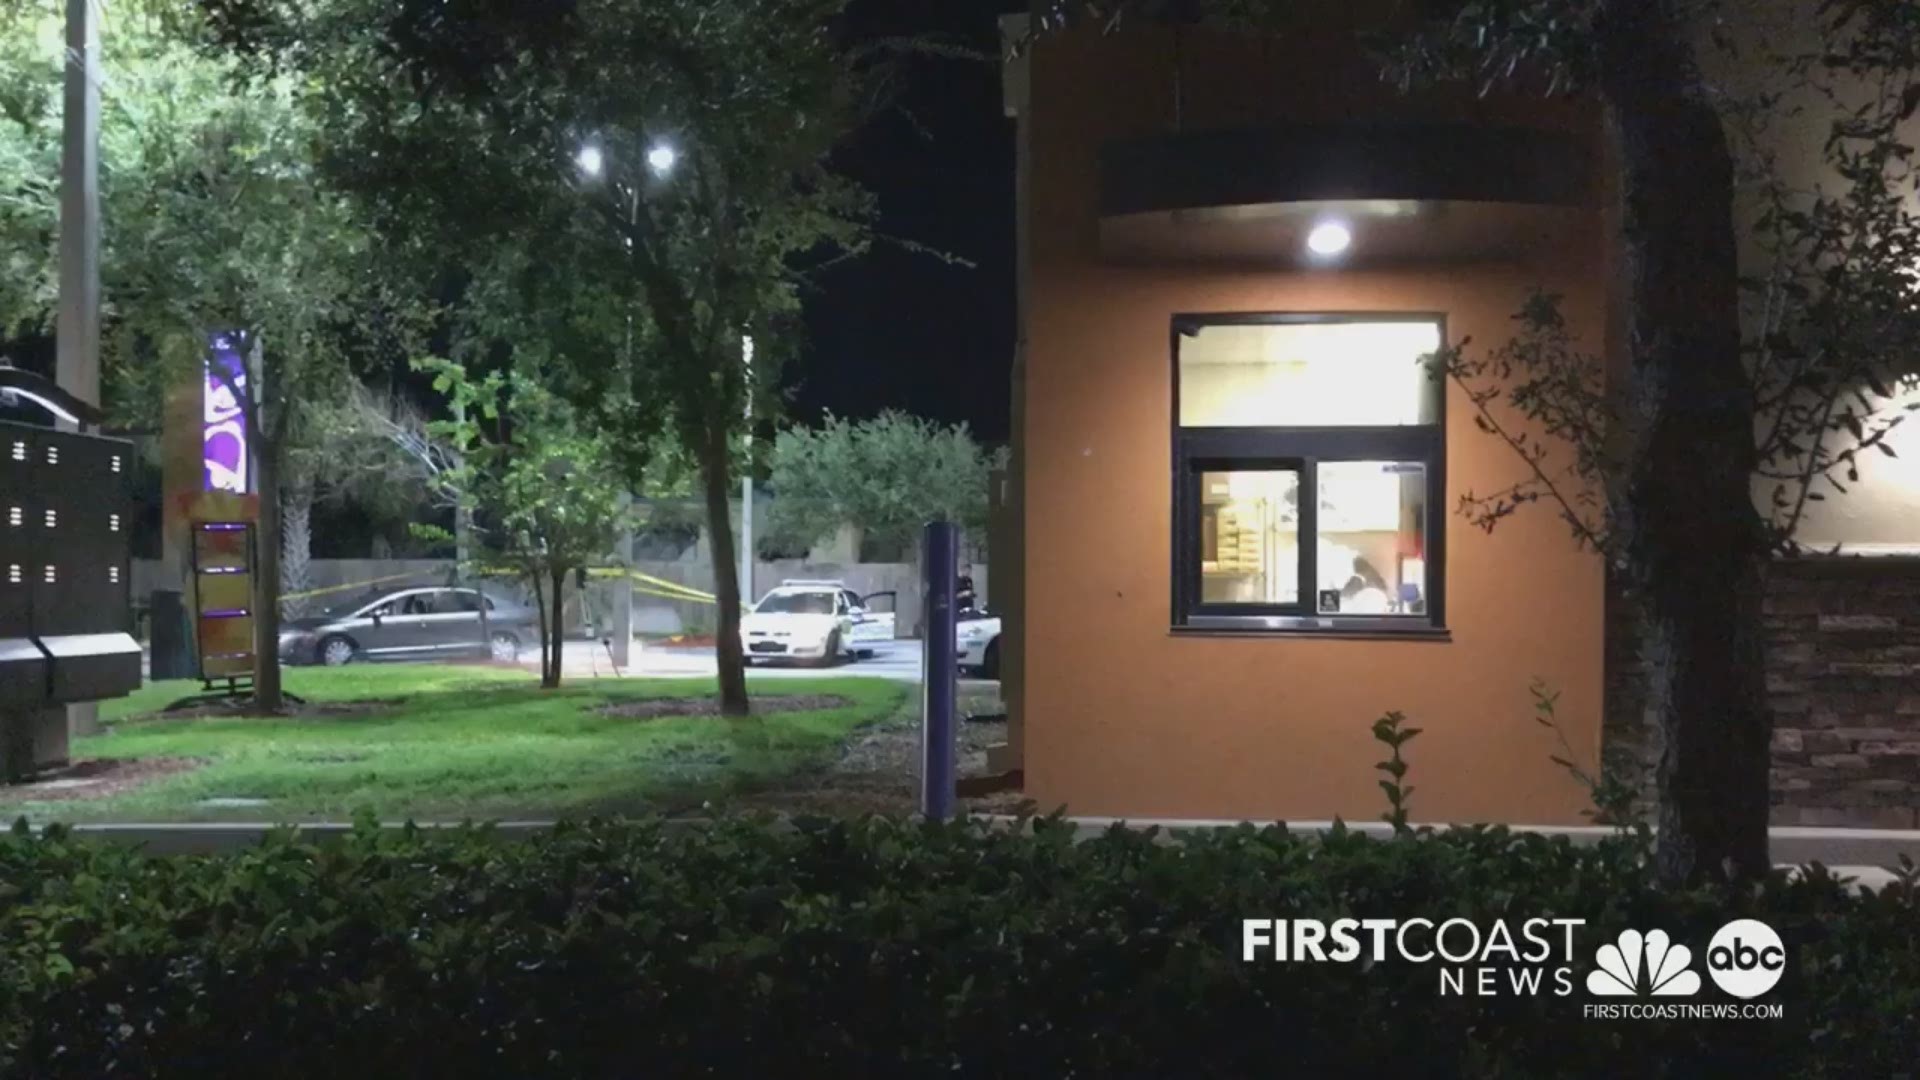 The Jacksonville Beach Police Department is currently investigating a shooting that occurred around 2:15 a.m. at Taco Bell.